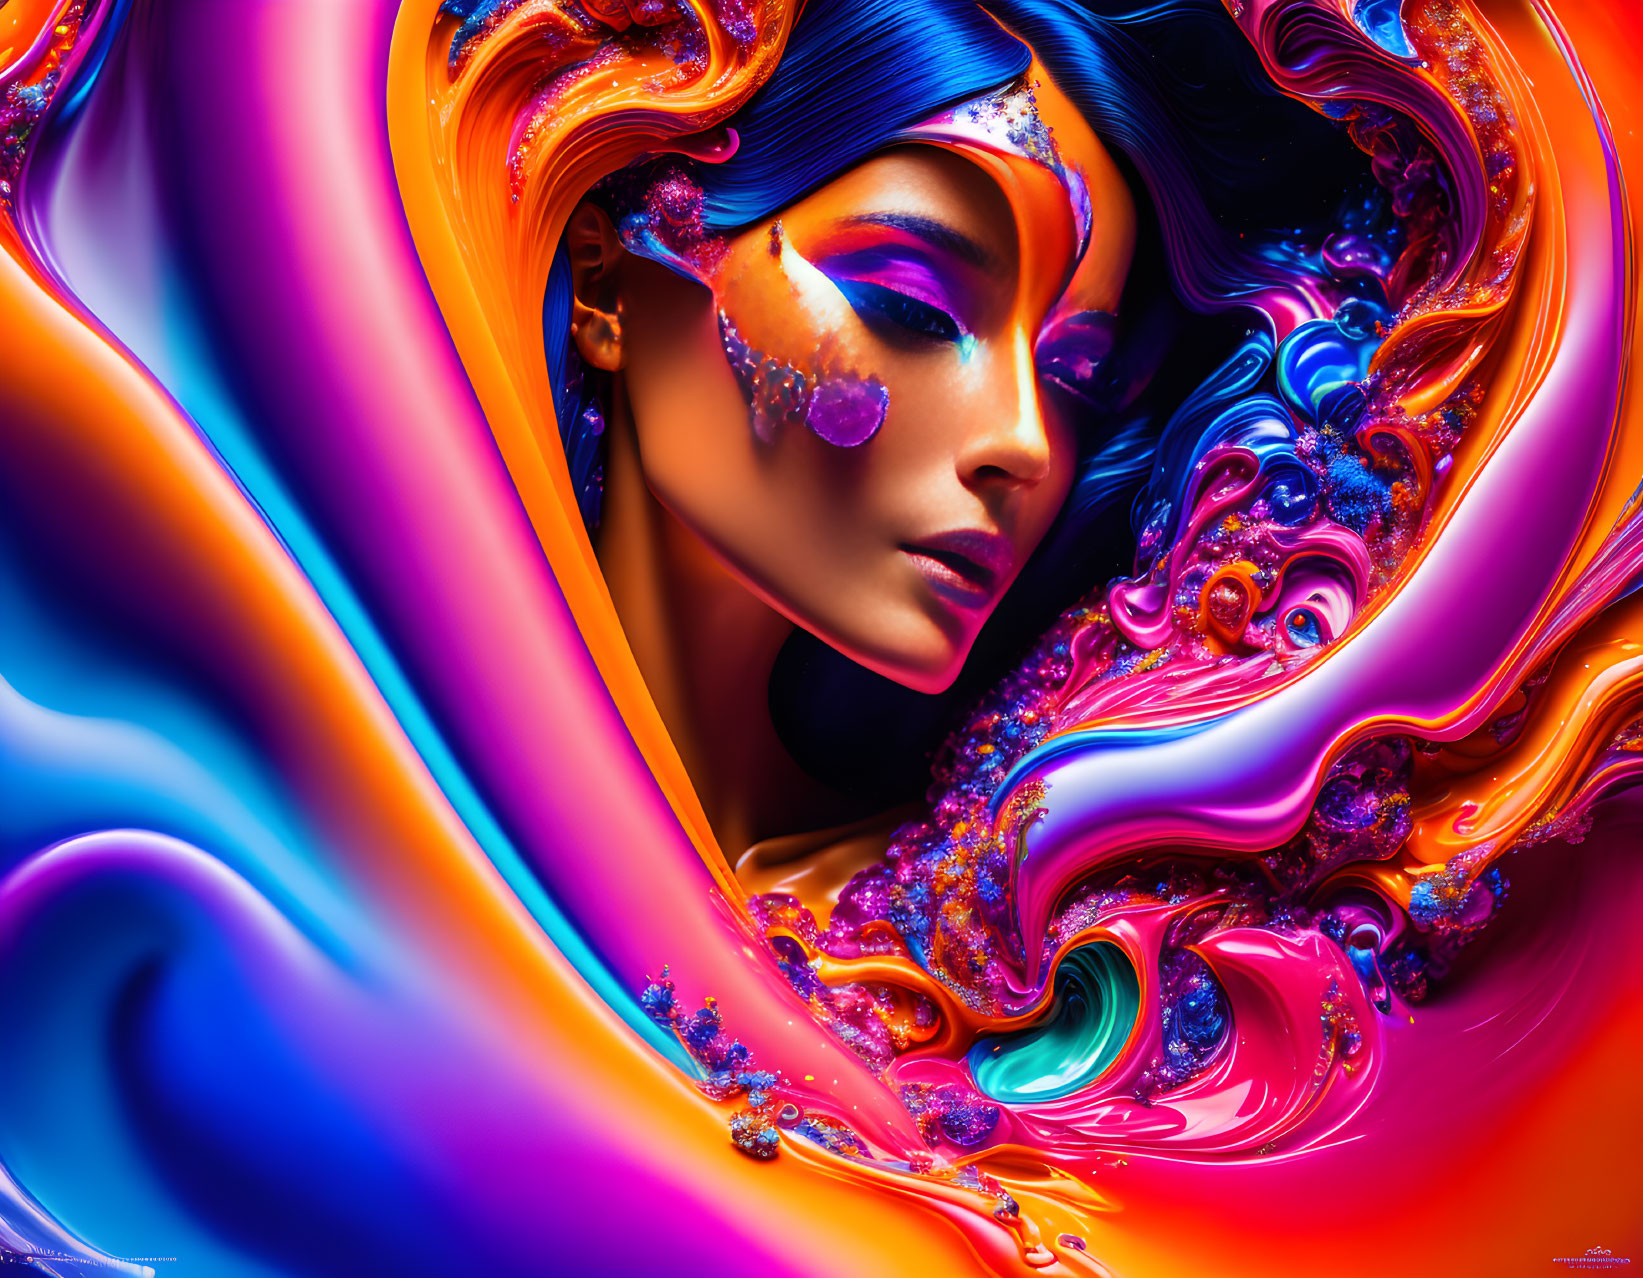 Vibrant digital artwork: Woman's portrait with swirling, glossy patterns